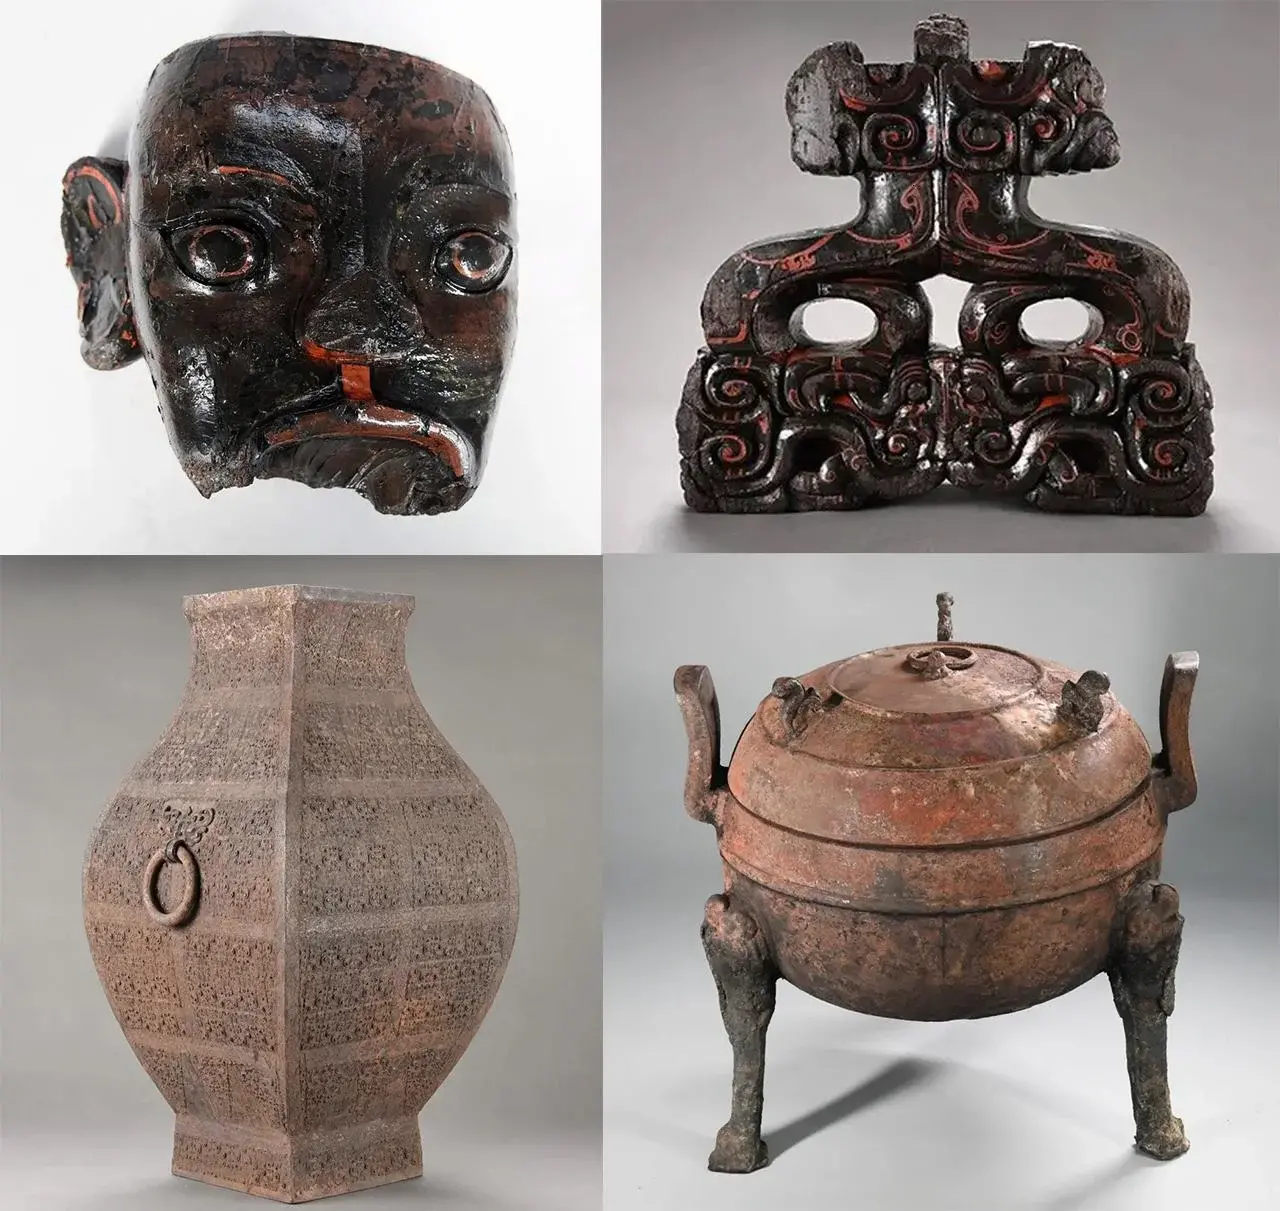 The finds include several artifacts which have never been seen before in a Chinese tomb